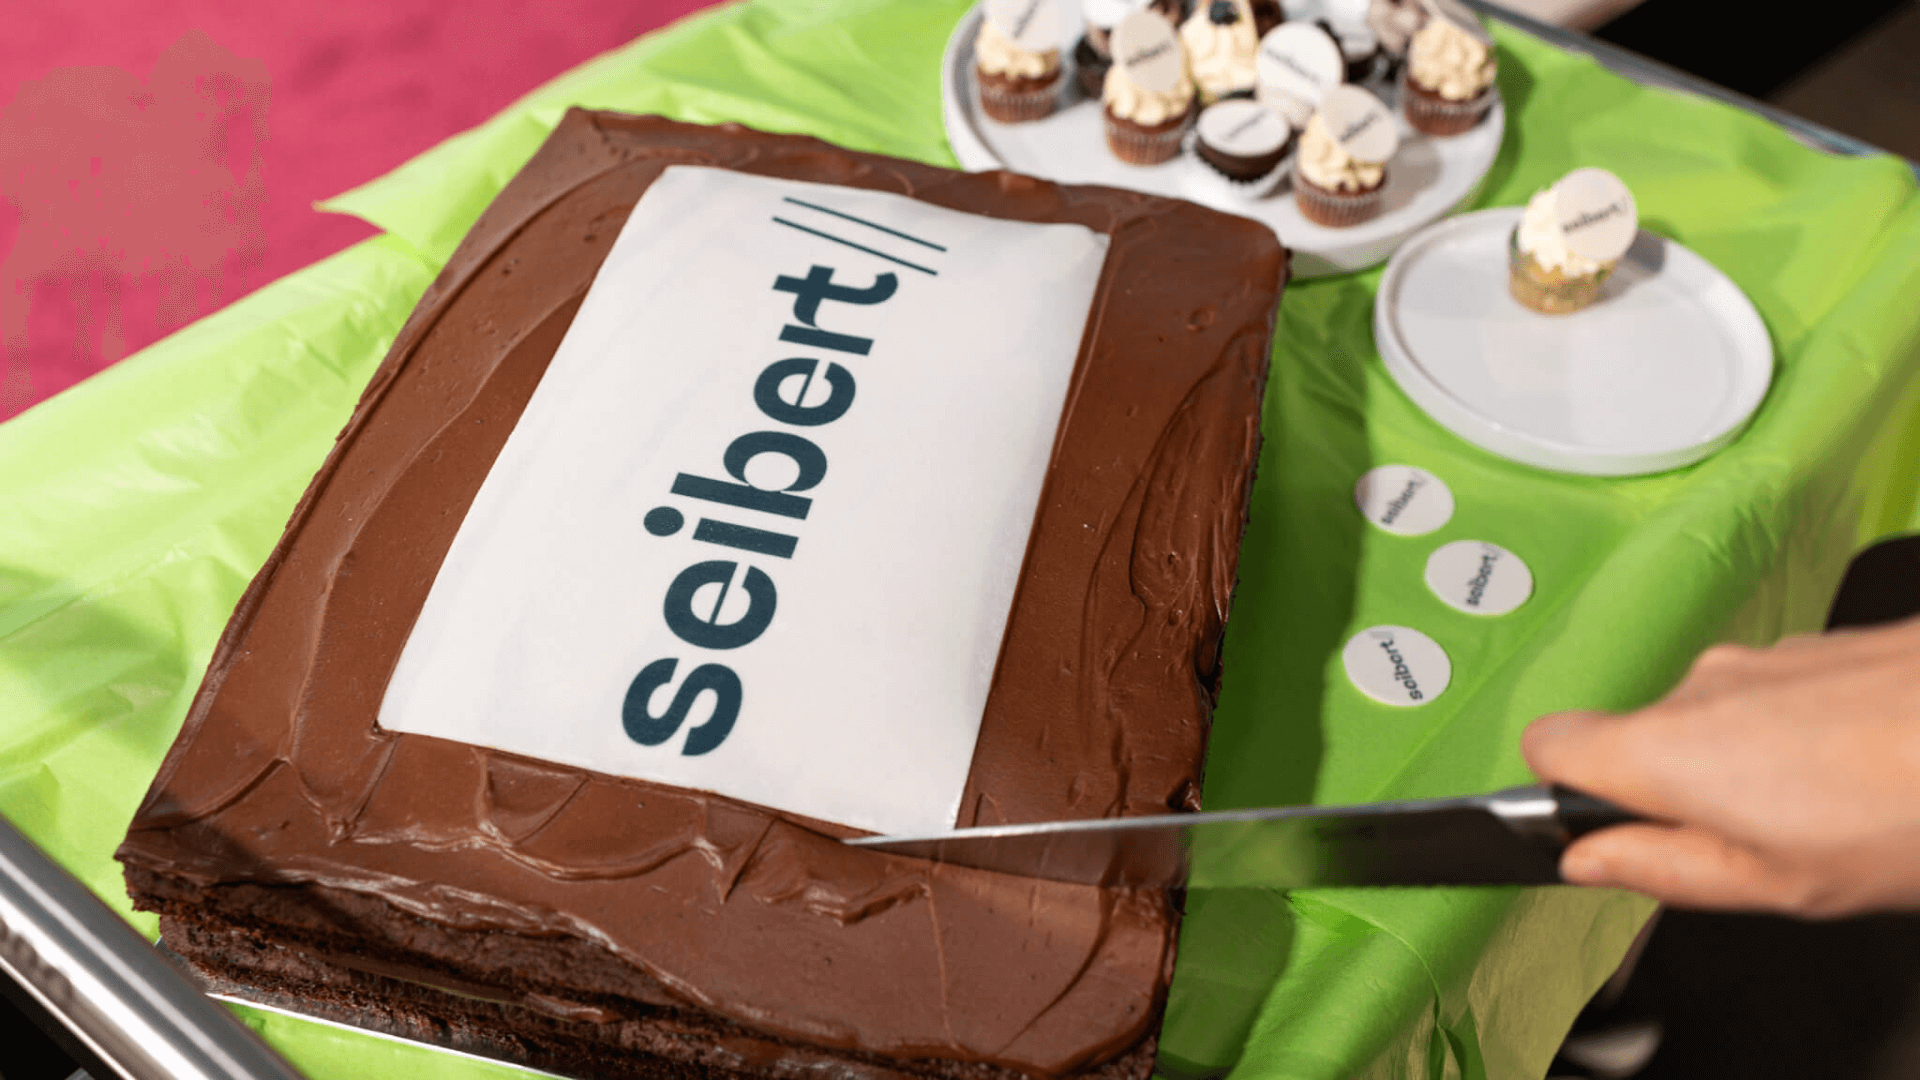 The Seibert Network Has a New Logo - the new seibert logo on a square cake